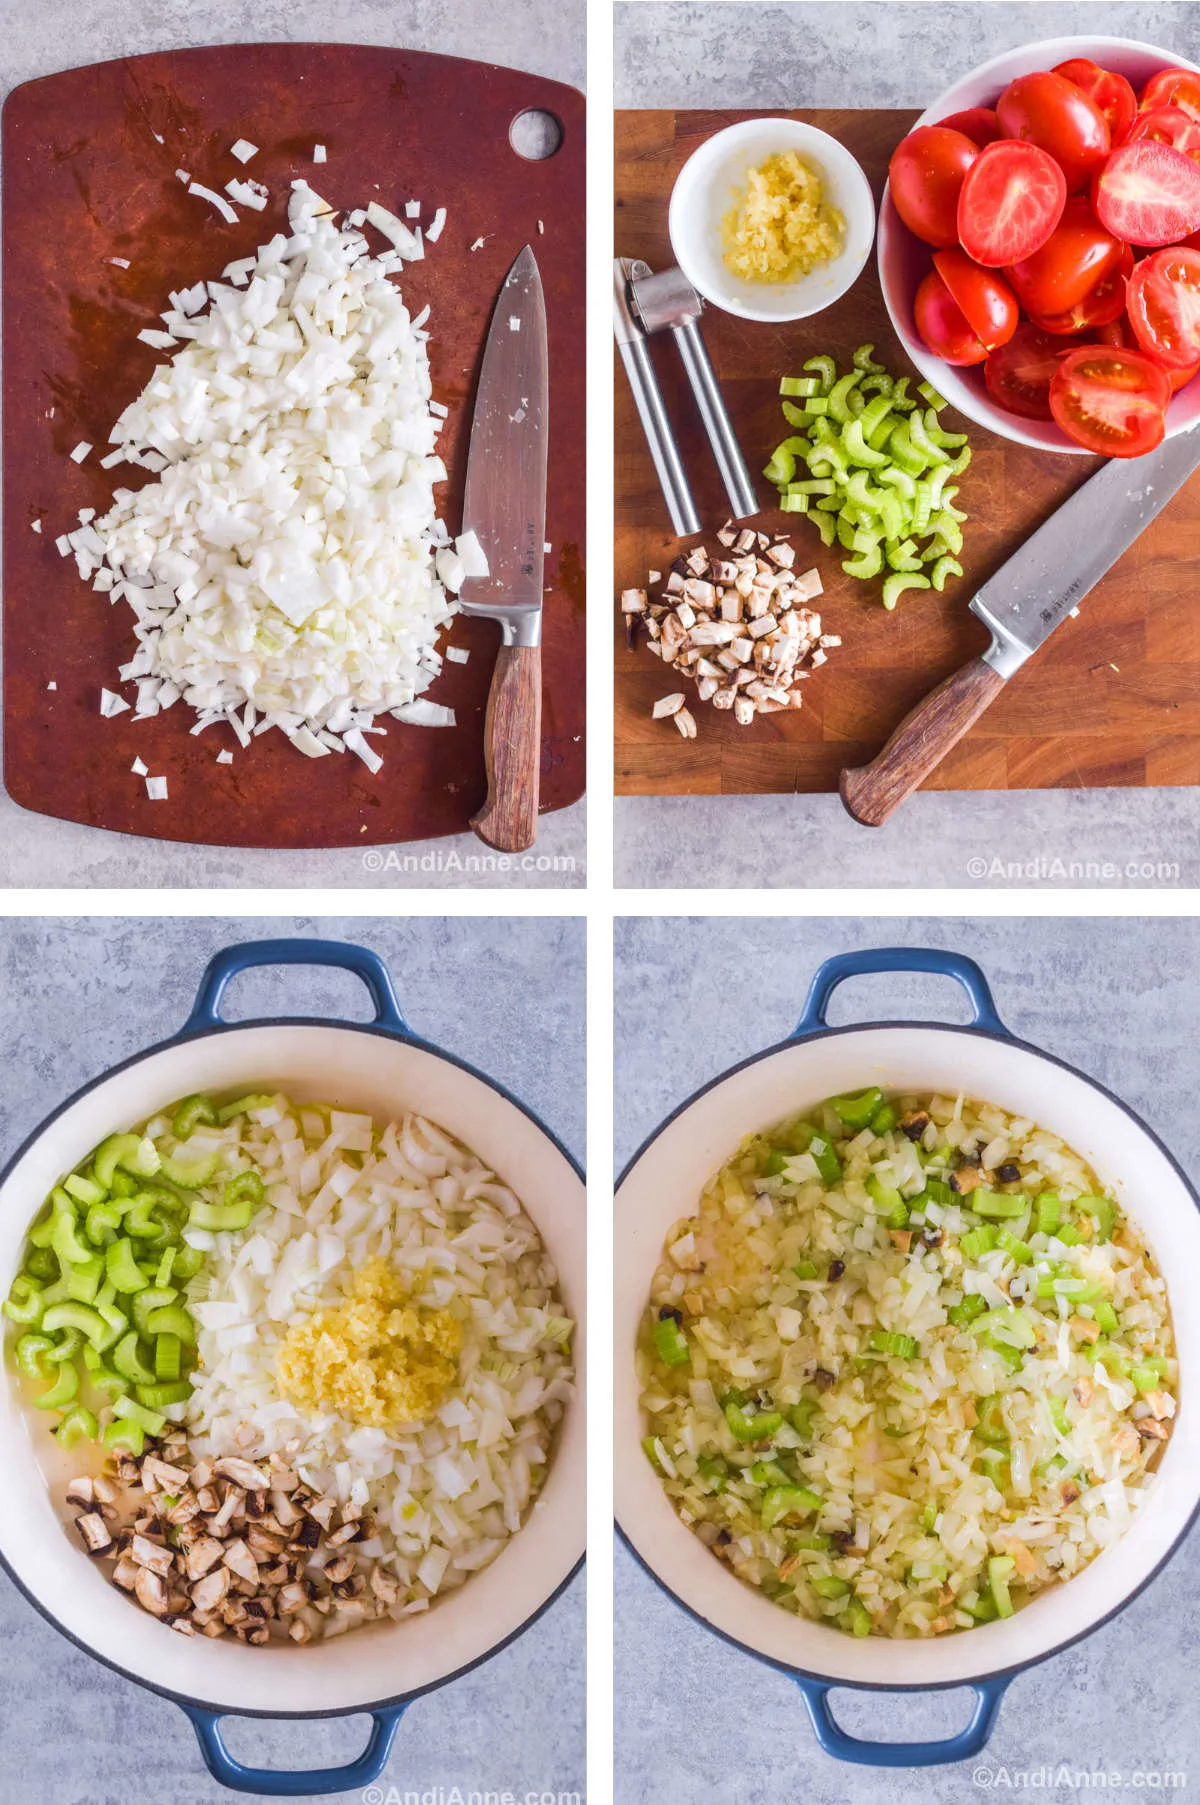 Four images in one: 1. Onions chopped on cutting board with chef knife. 2. Celery and mushrooms chopped on cutting board, garlic minced in white bowl, tomatoes chopped in half in bowl. 3. All above ingedients in pot. 4. All above ingredients cooked in pot. 